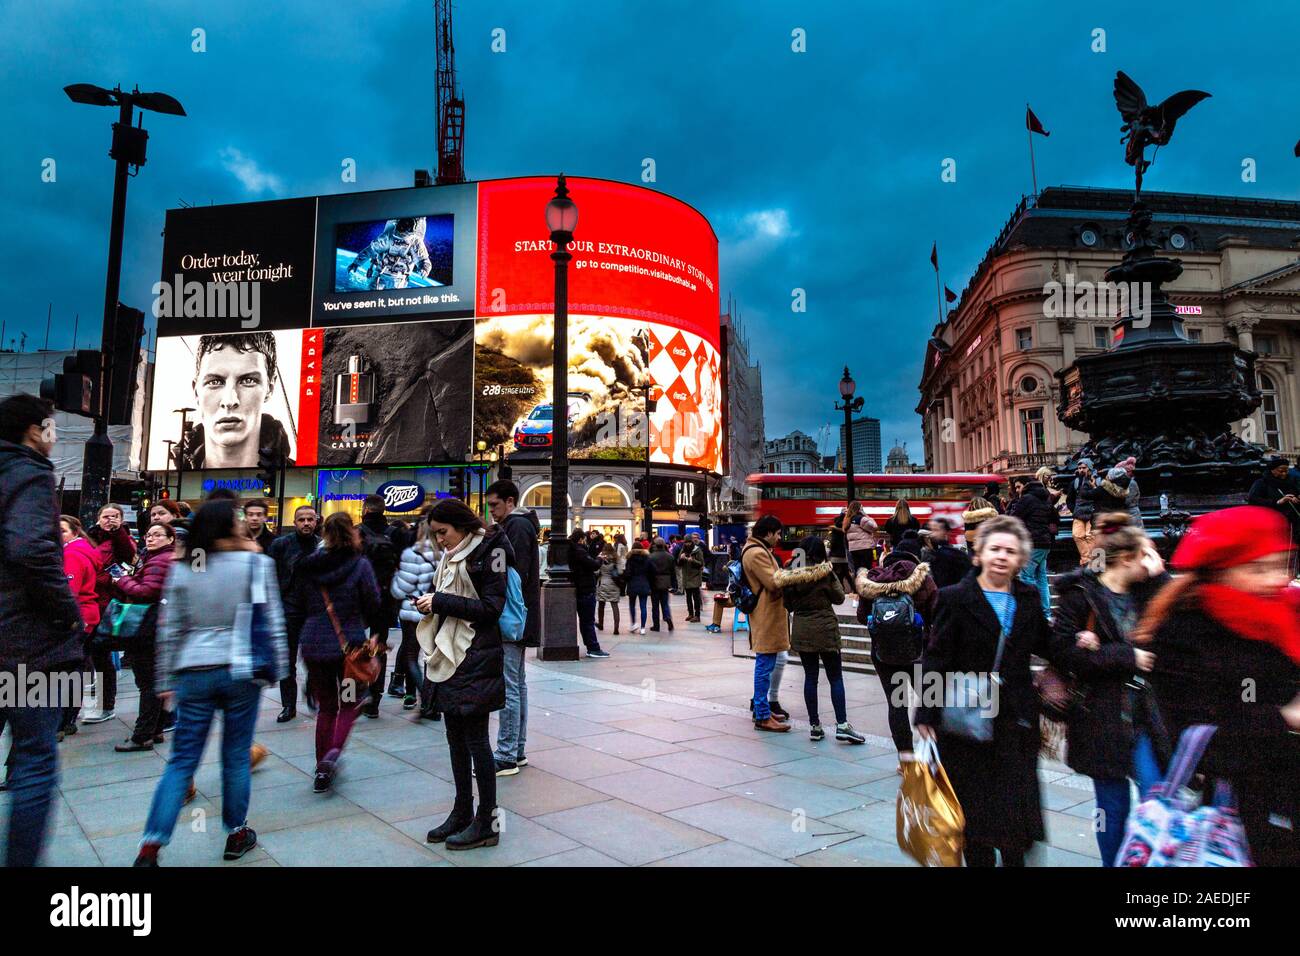 People rushing around at Piccadilly Circus at evening time with the iconic advertising screen in the background, London, UK Stock Photo